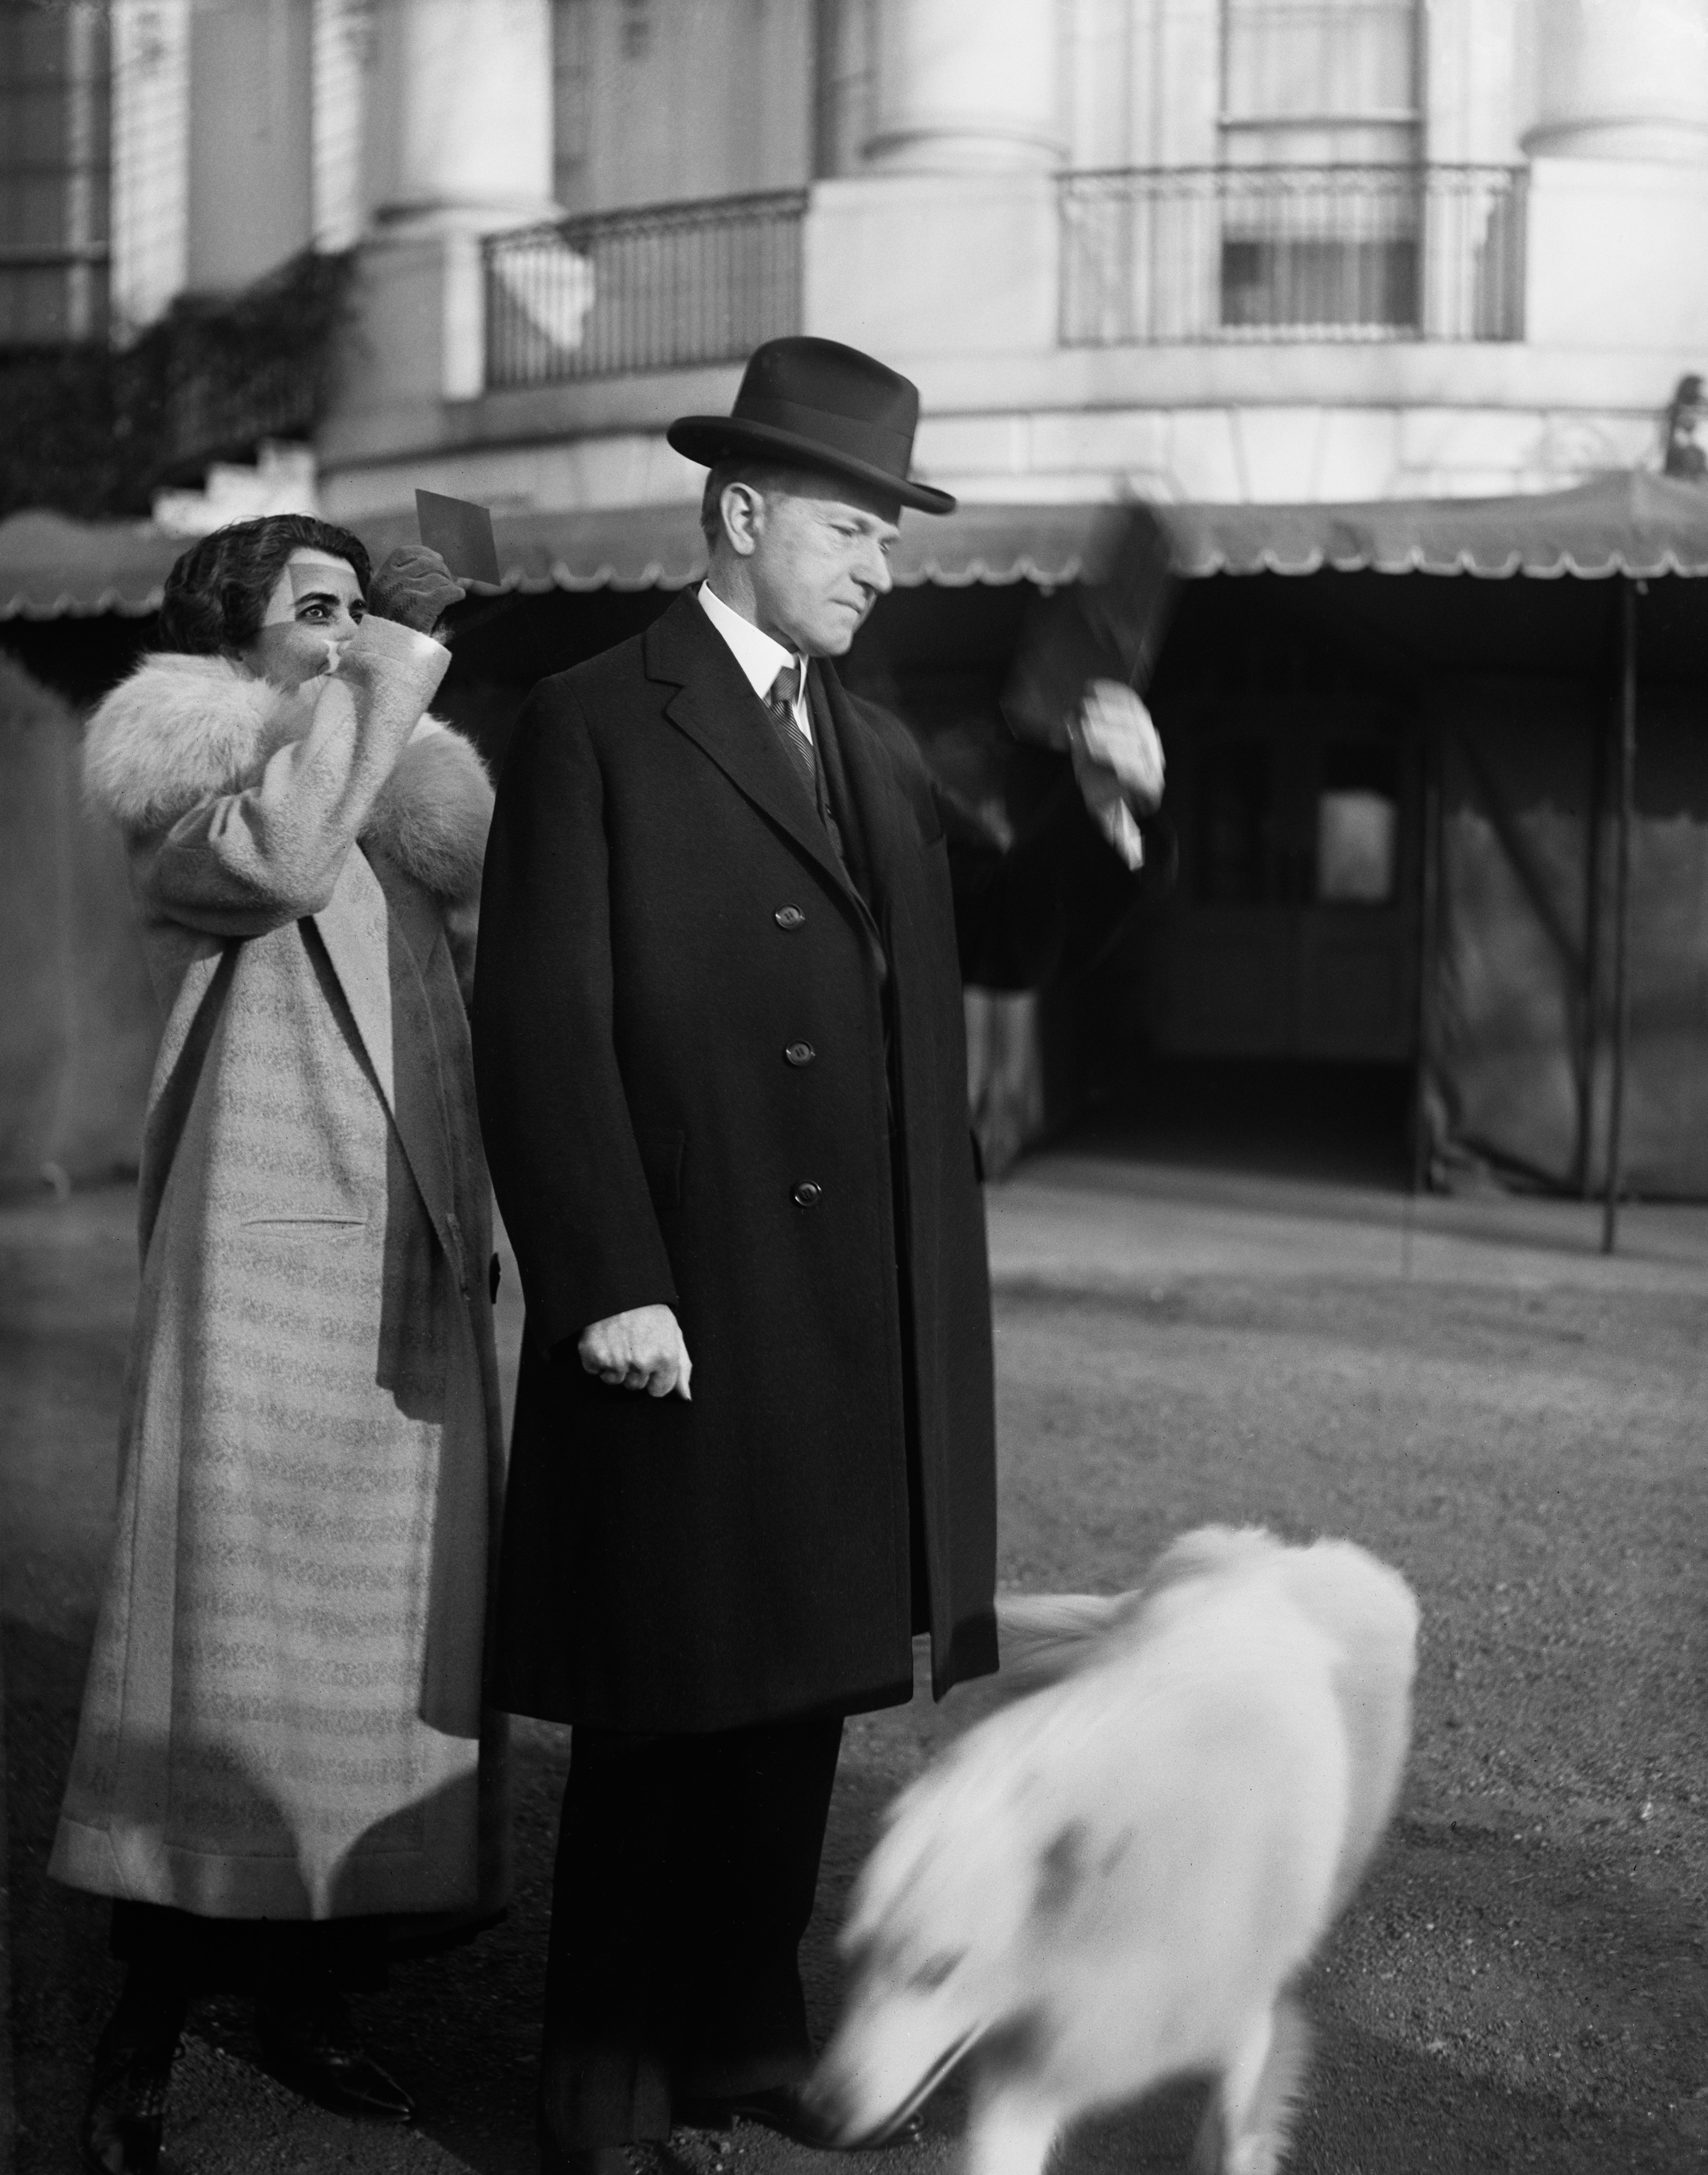 Woman in fur coat and man in suit and hat walking, blurred motion, dog in foreground